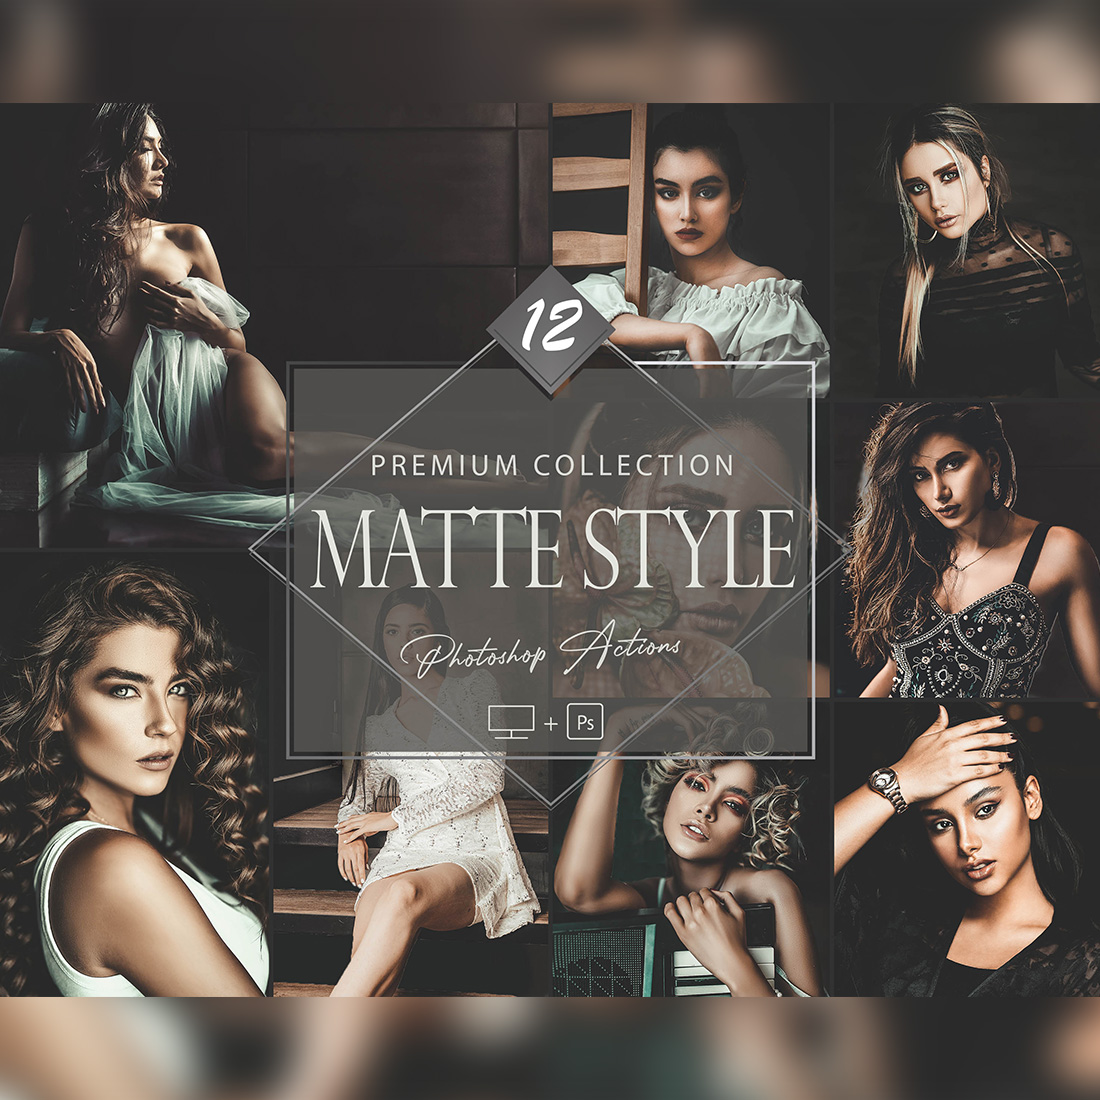 12 Photoshop Actions, Matte Style Ps Action, Black Dark ACR Preset, Moody Filter, monotone And Lifestyle Theme For Instagram, Blogger, Bronze portrait cover image.